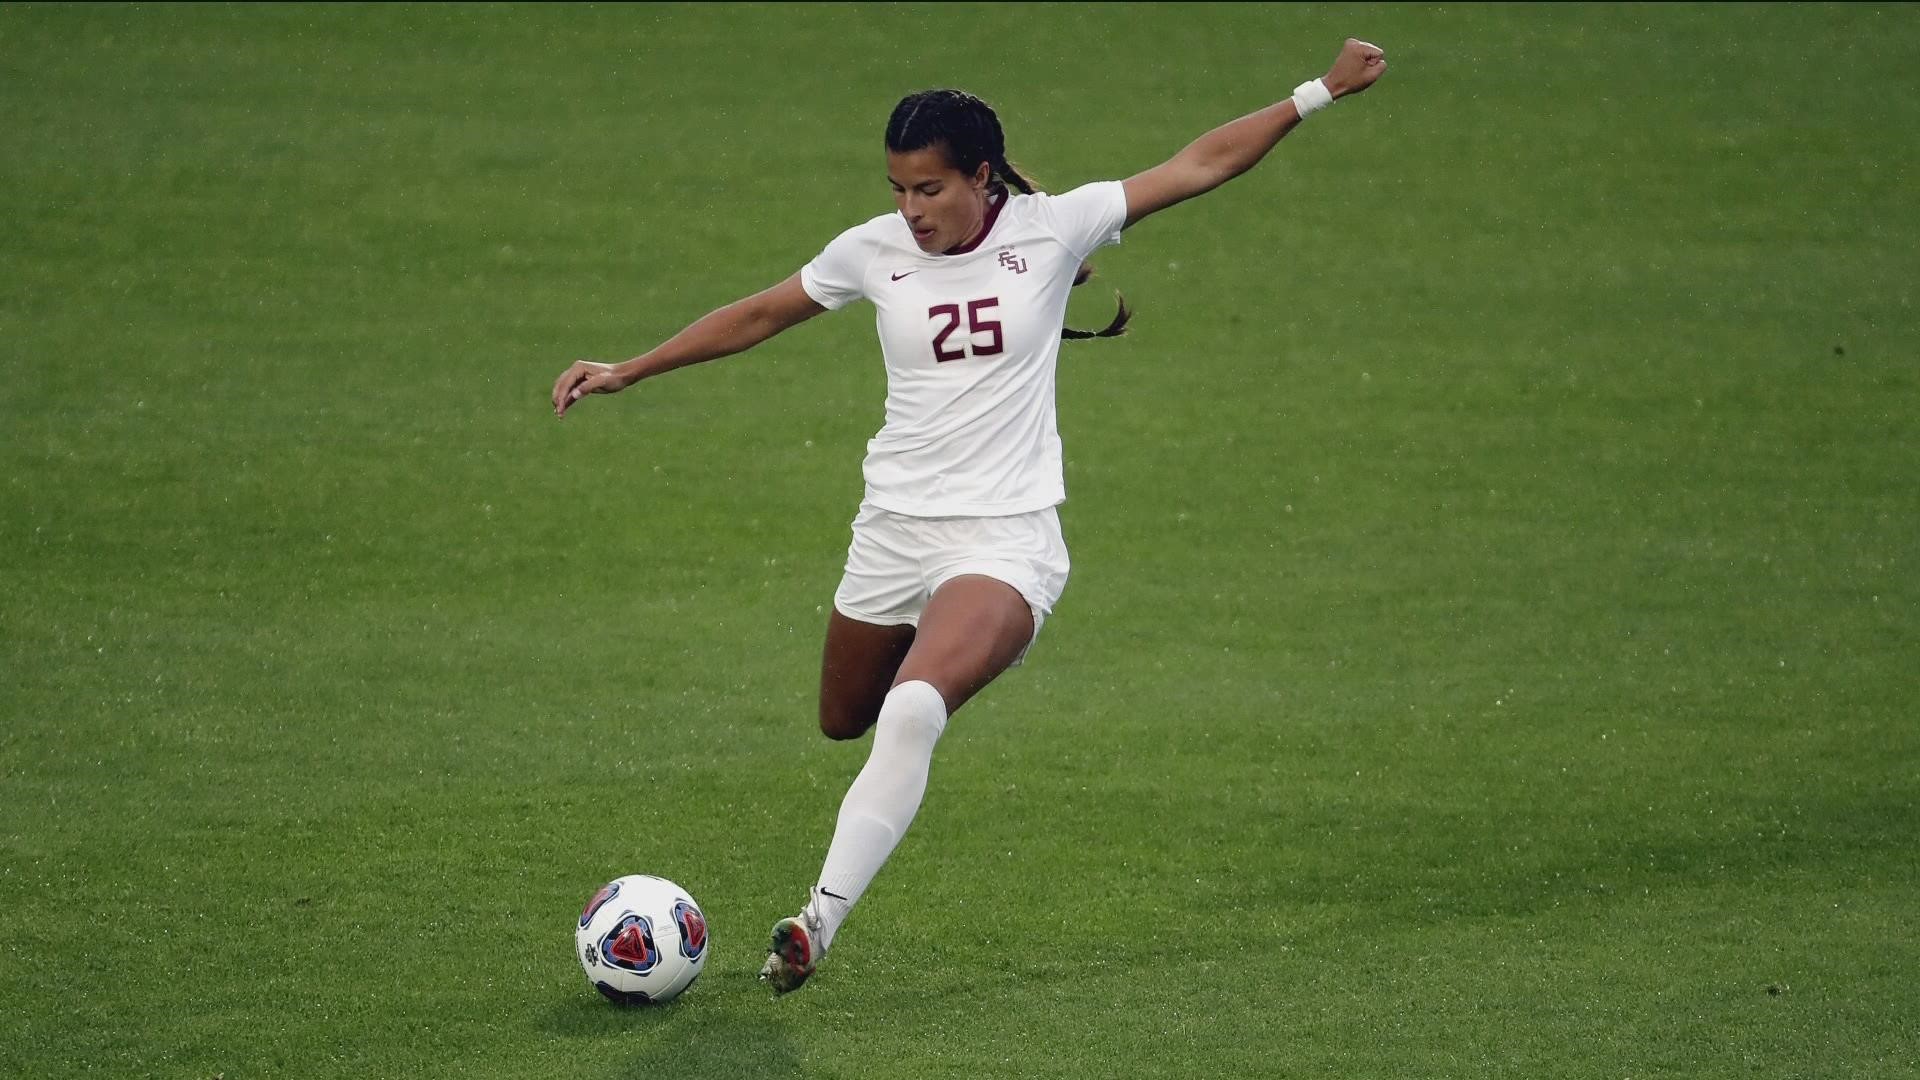 Former Centennial High School and Boise Timbers-Thorns standout Emily Madril was selected No. 3 overall by the Orlando Pride in Thursday's 2023 NWSL Draft.